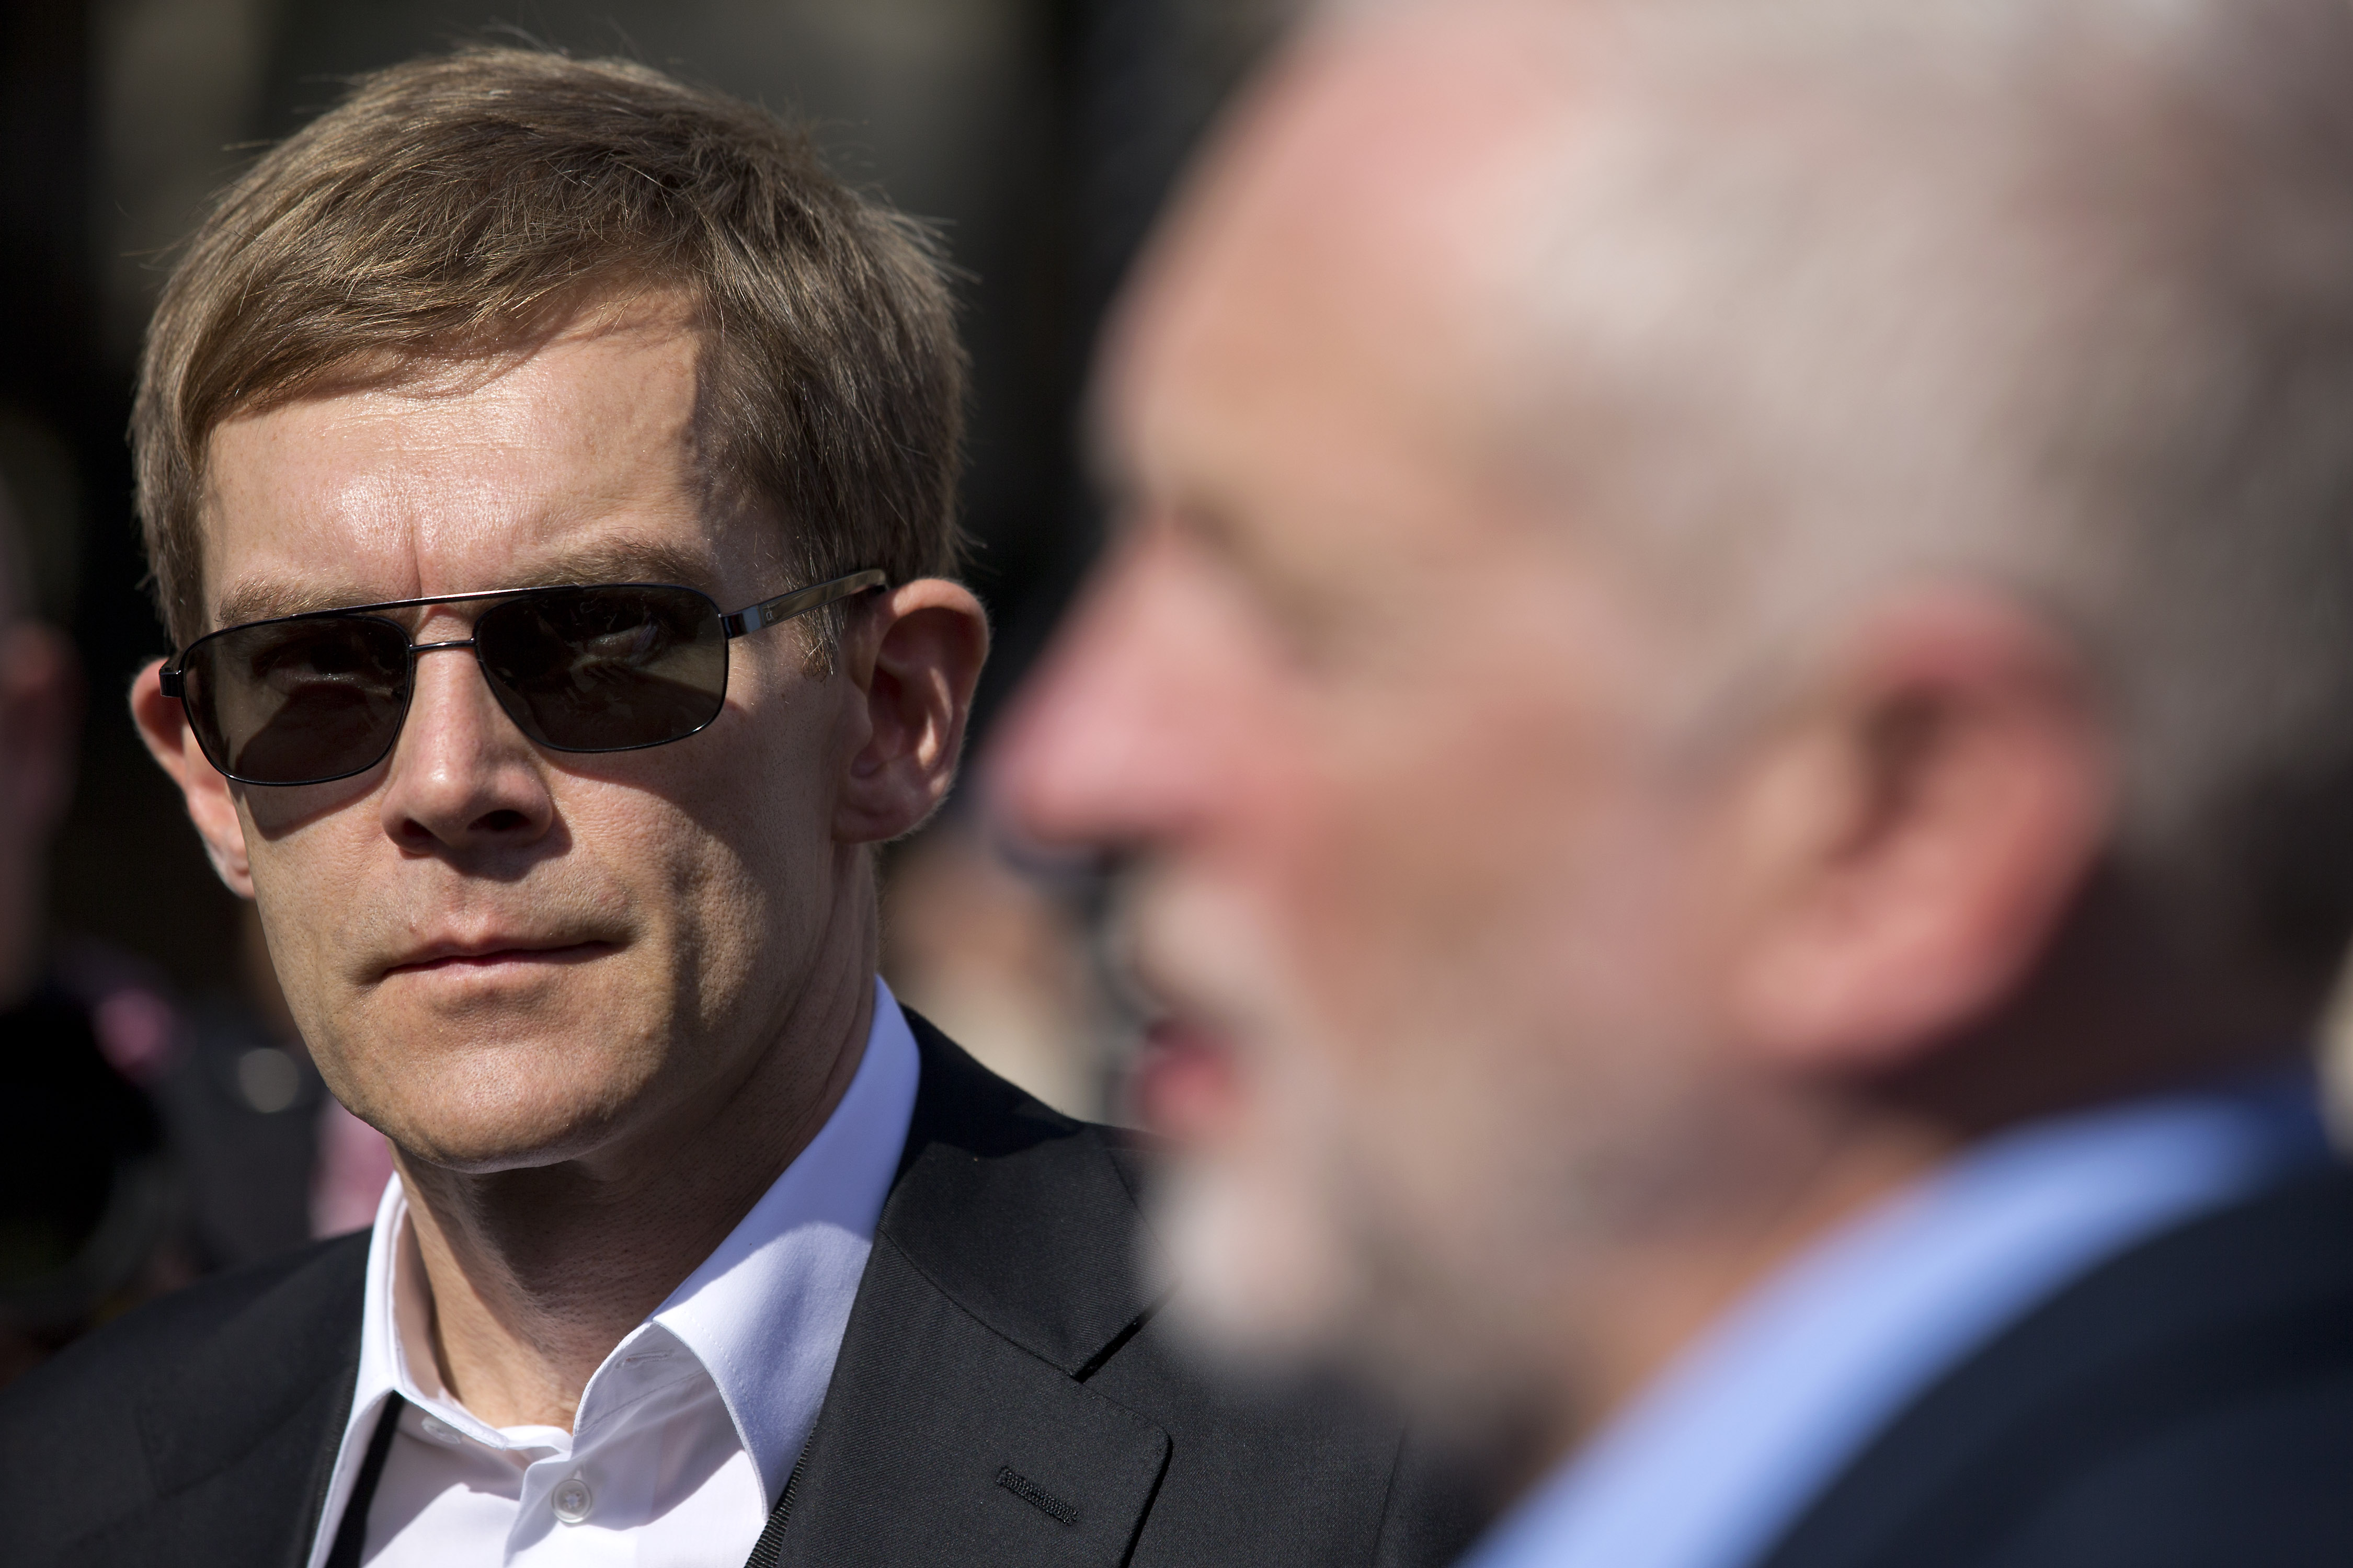 Seumas Milne (left), a former Guardian journalist, is Corbyn’s media adviser and right hand man (AFP)